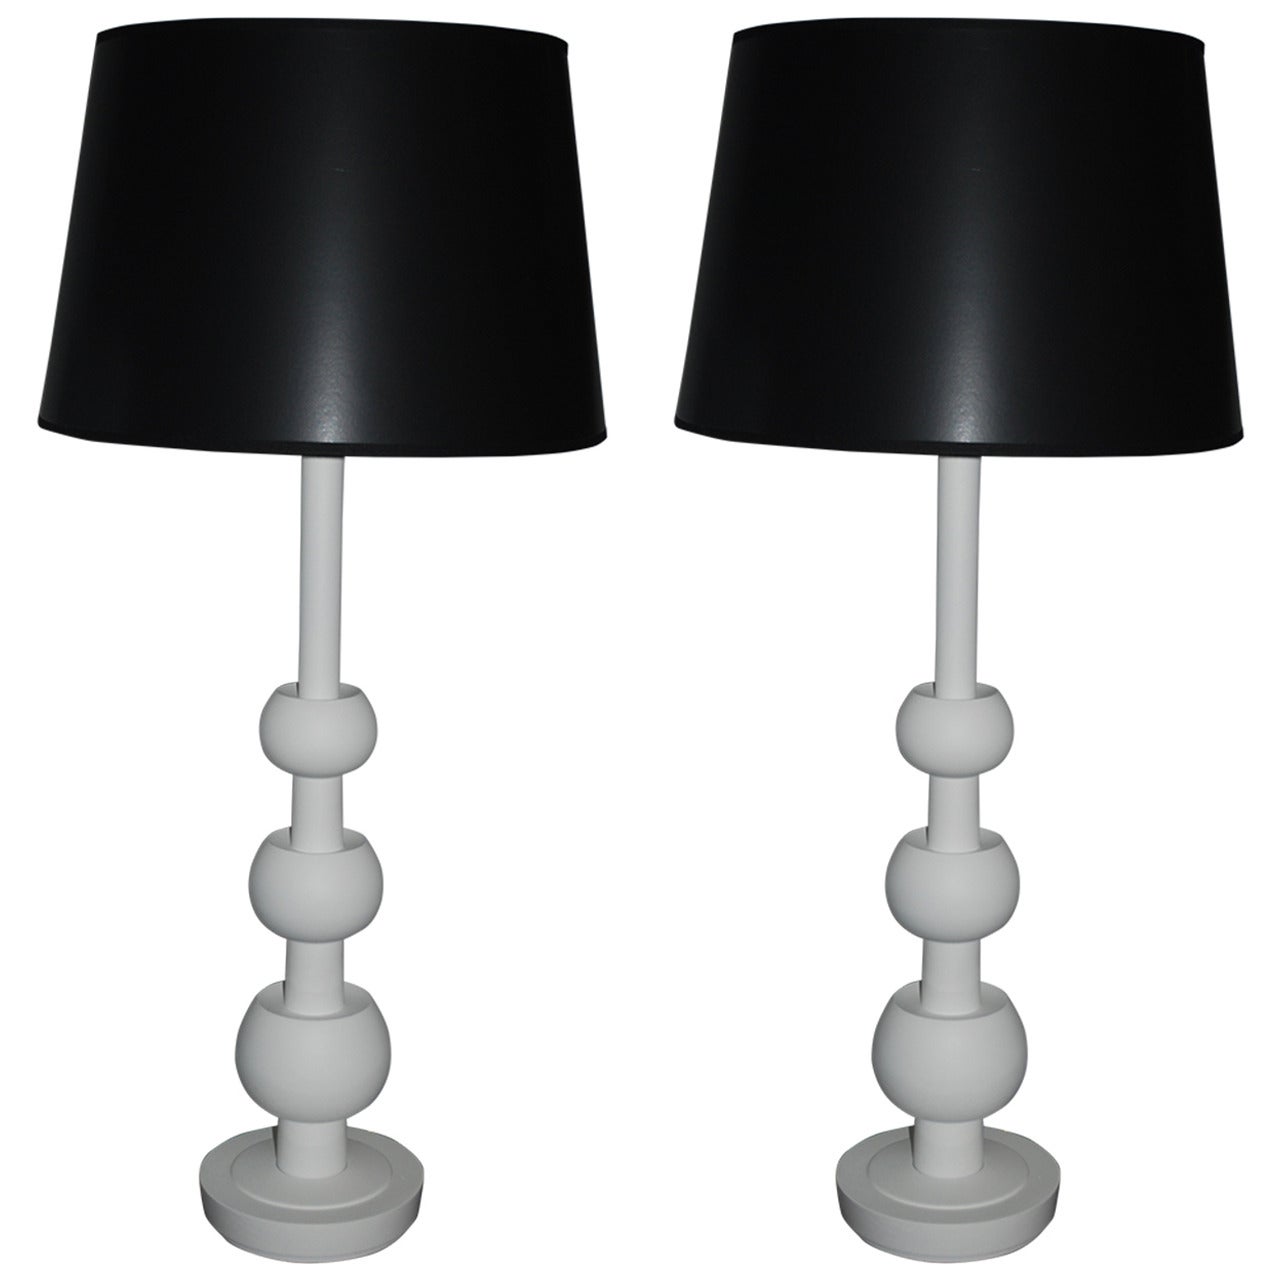 Pair of Sculptural White Table Lamps, 1960s